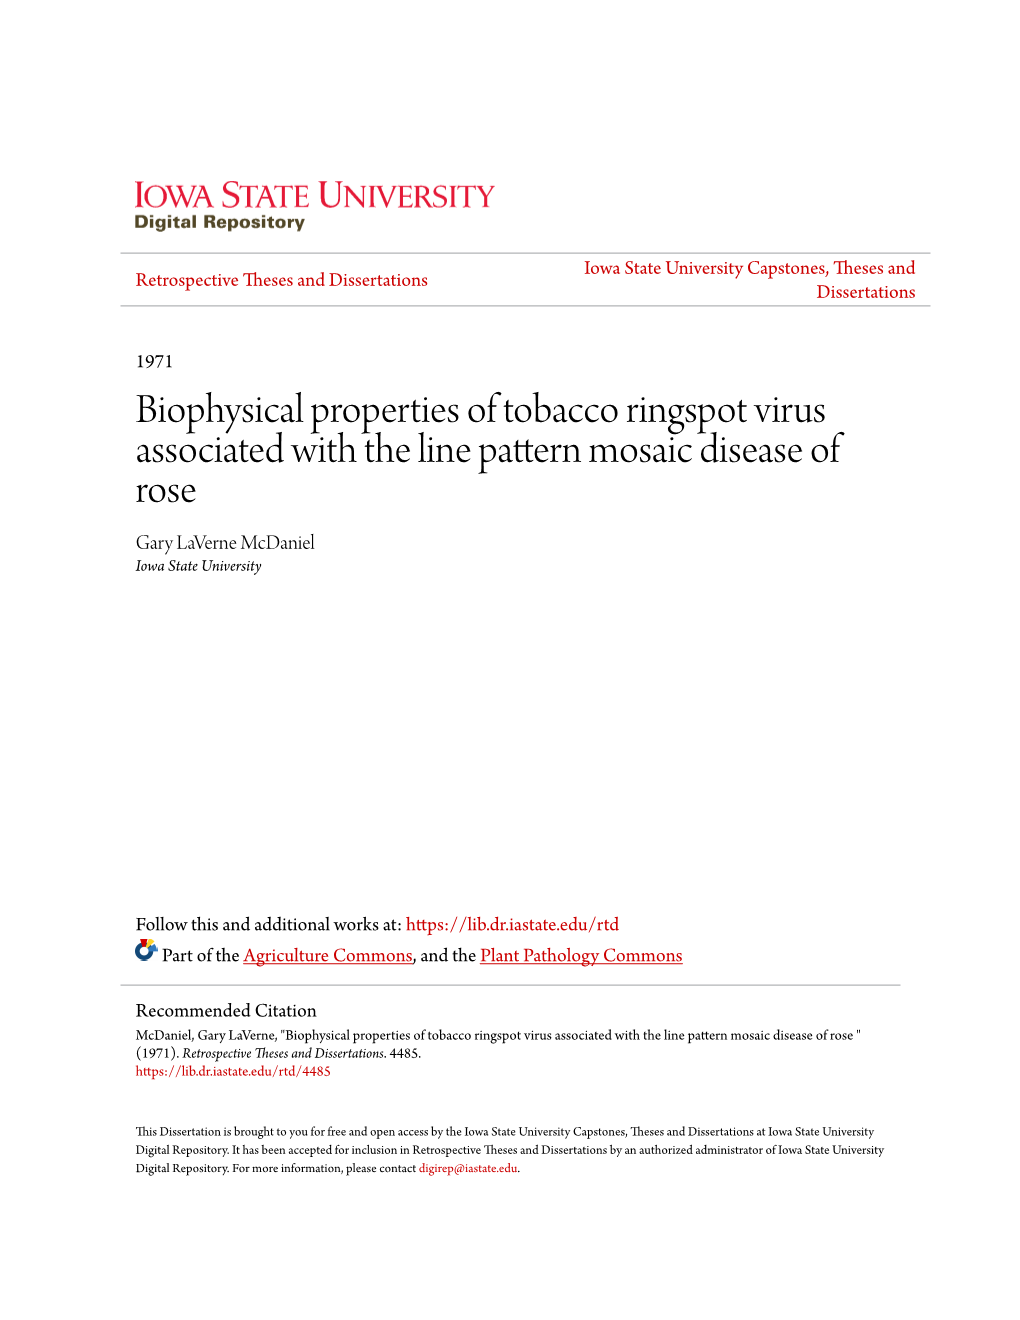 Biophysical Properties of Tobacco Ringspot Virus Associated with the Line Pattern Mosaic Disease of Rose Gary Laverne Mcdaniel Iowa State University